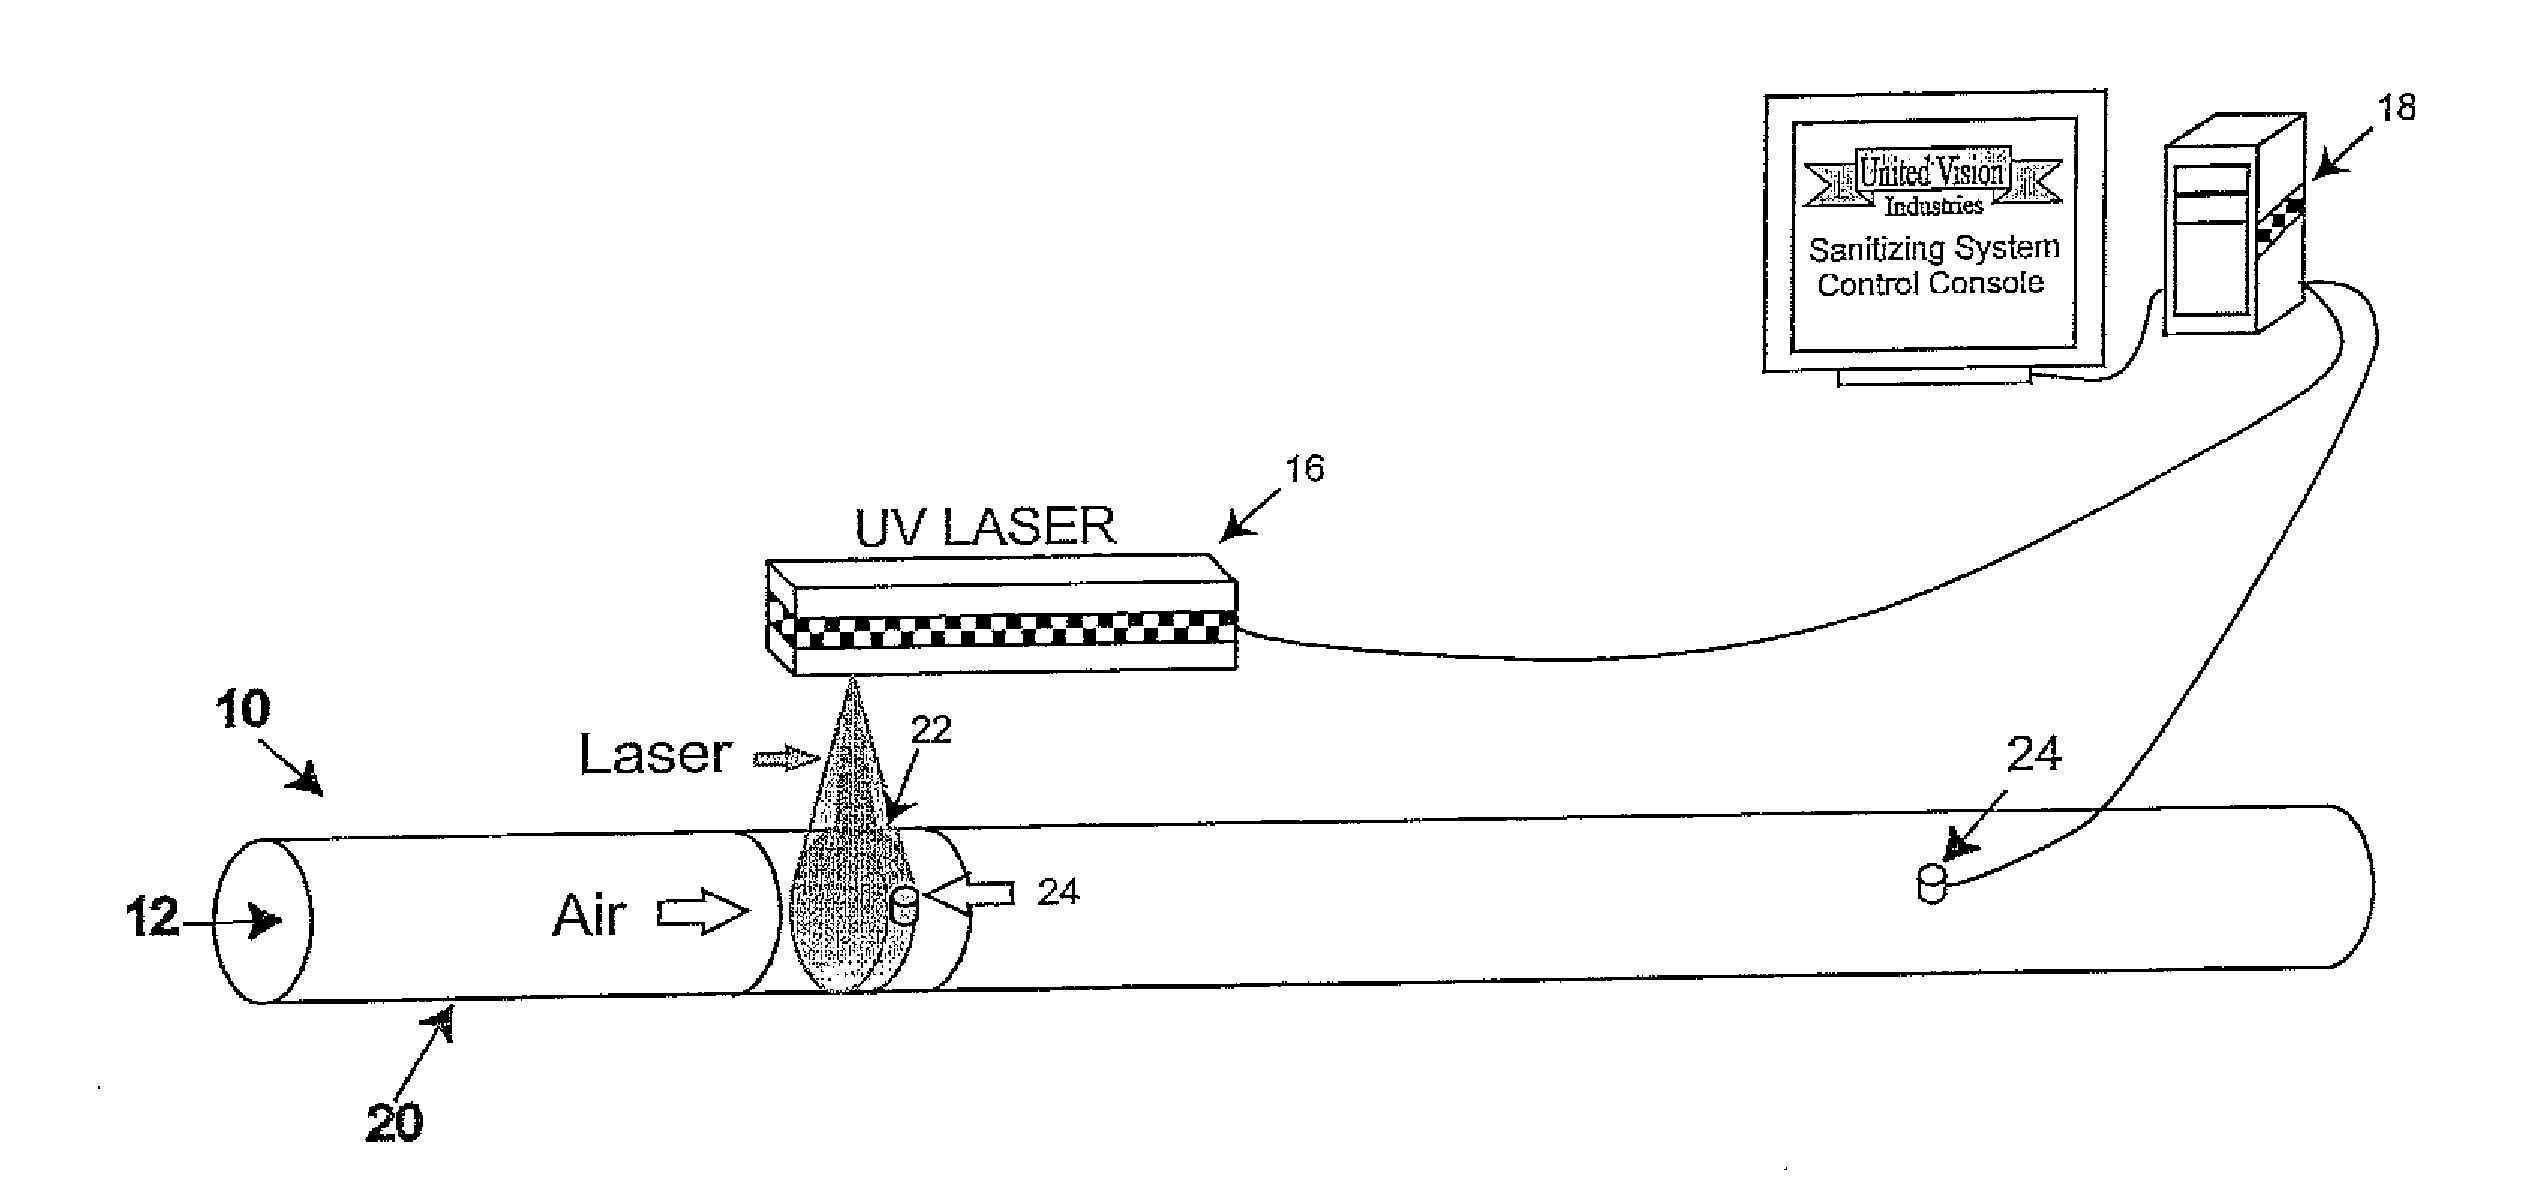 Method & apparatus for sanitizing air in aircraft, commercial airliners, military vehicles, submarines, space craft, cruise ships , passenger vehicles, mass transit and motor vehicles by integration of high density high efficiency ultra violet illumination apparatus within air conditioning, ventilation and temperature control systems